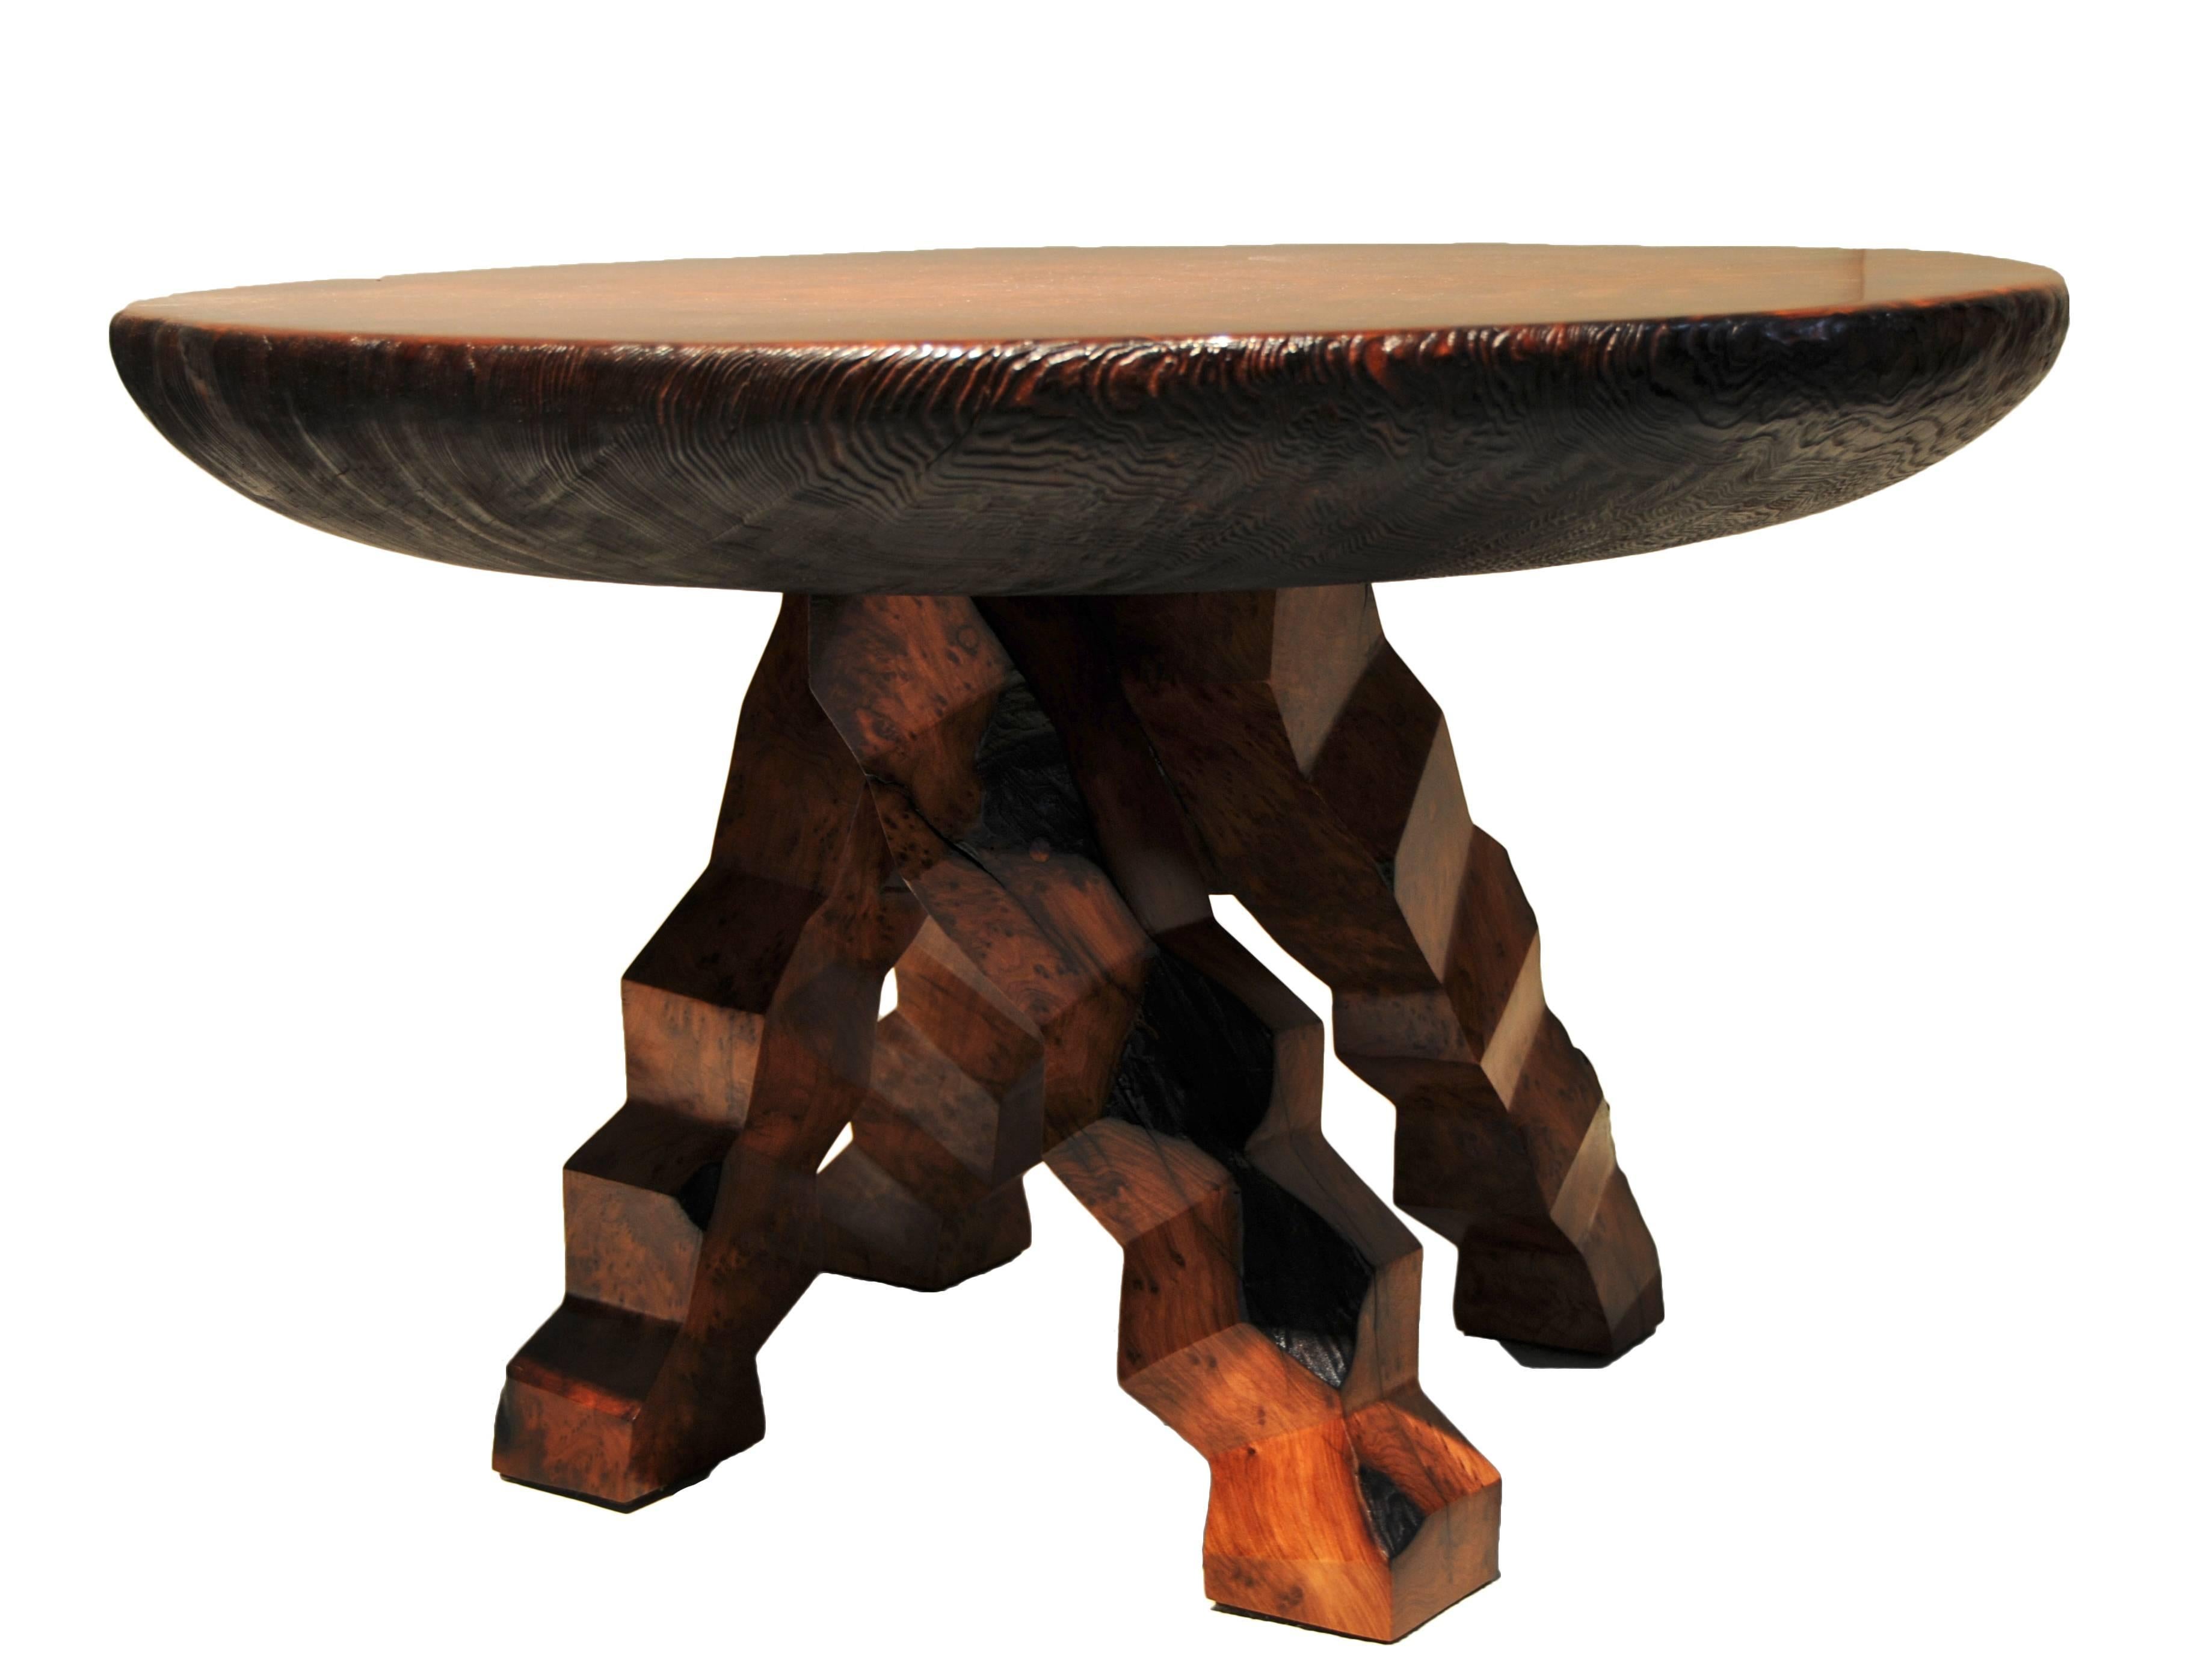 Untitled, Redwood Burl Table - Art by Rufus Blunk